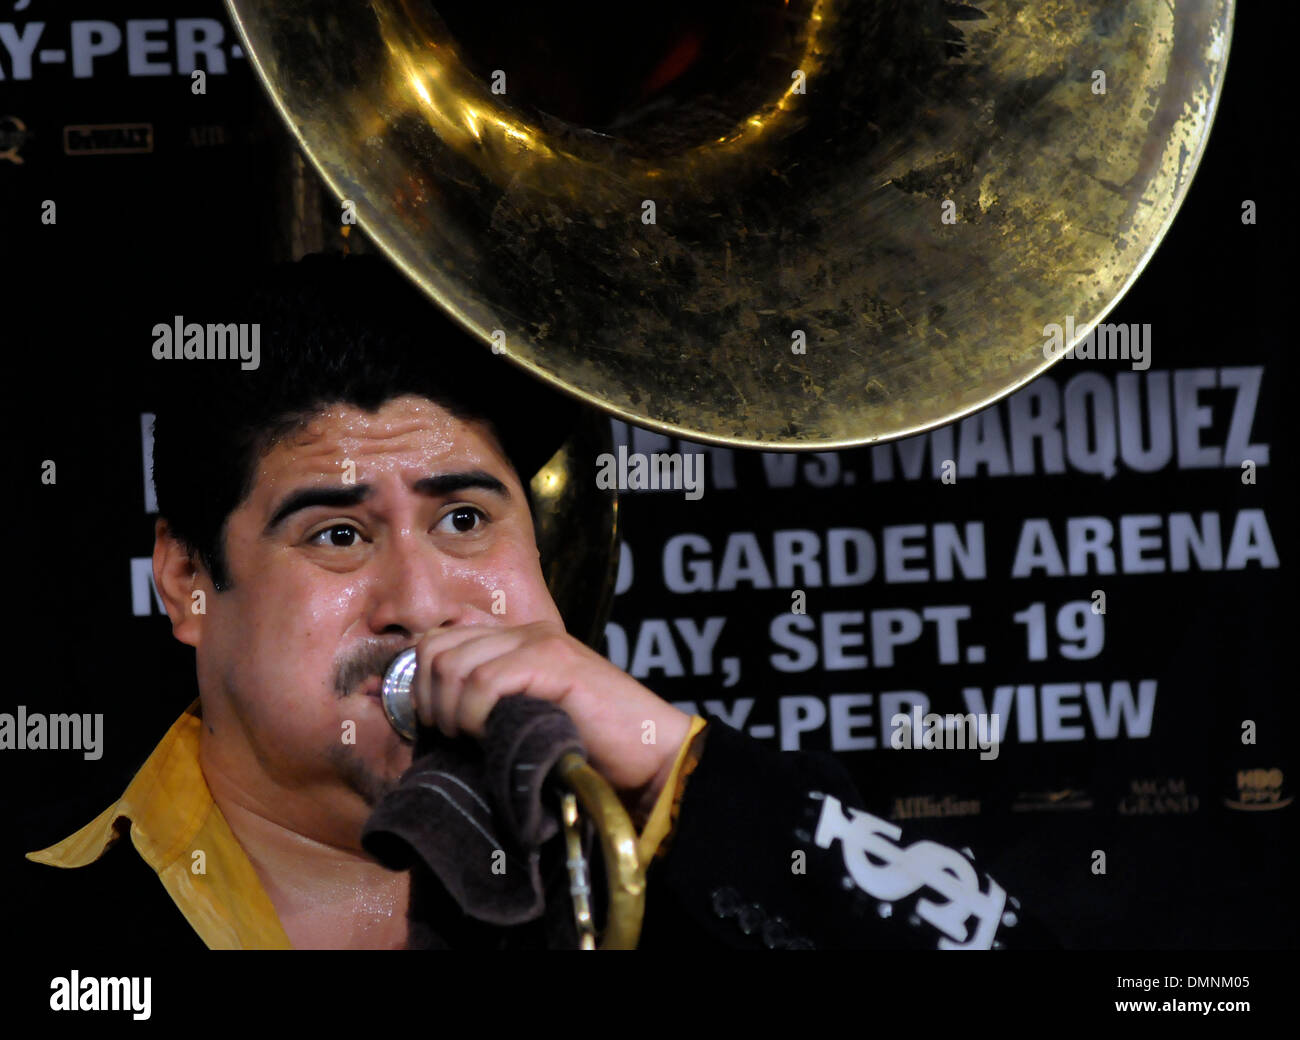 Sep 16, 2009 - Las Vegas, Nevada, USA - JESUS GARCIA, tuba player with the Mexican band El Moreno Carrillo Tierra Sagrada blows his horn before the news conference at the MGM Grand Hotel/Casino on Wednesday. The band entertained member of the media before Floyd Mayweather Jr. and Juan Manuel Marquez entered the room. (Credit Image: © David Becker/ZUMA Press) Stock Photo